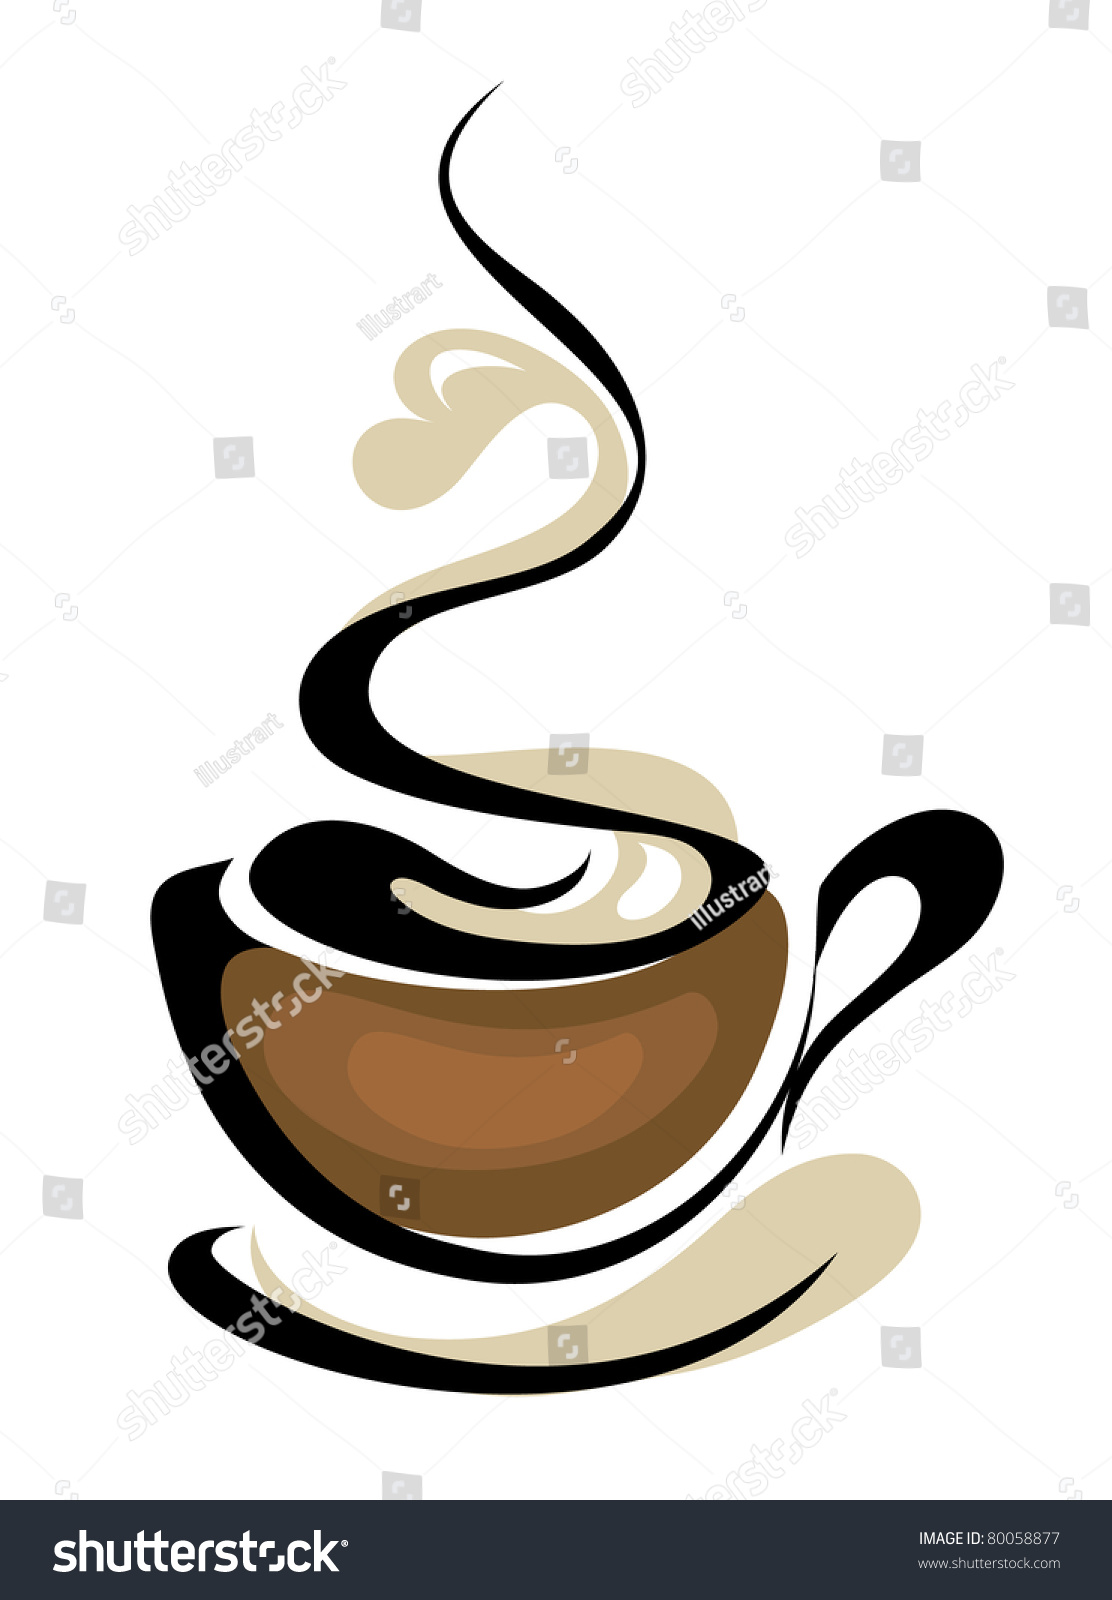 SVG of coffee cup svg